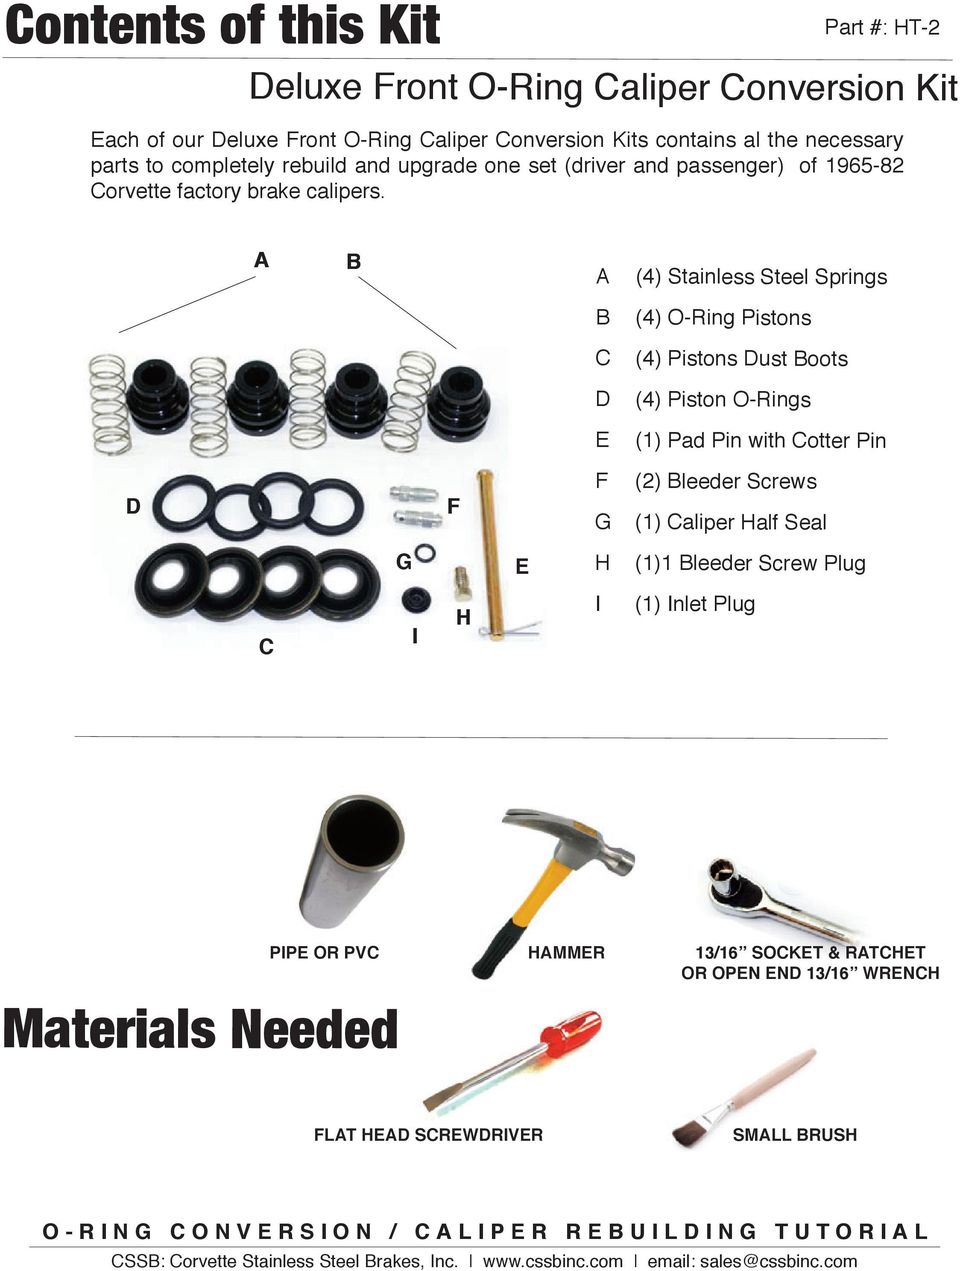 a b A (4) Stainless Steel Springs B (4) O-Ring Pistons C (4) Pistons Dust Boots D (4) Piston O-Rings E (1) Pad Pin with Cotter Pin d F F (2) Bleeder Screws